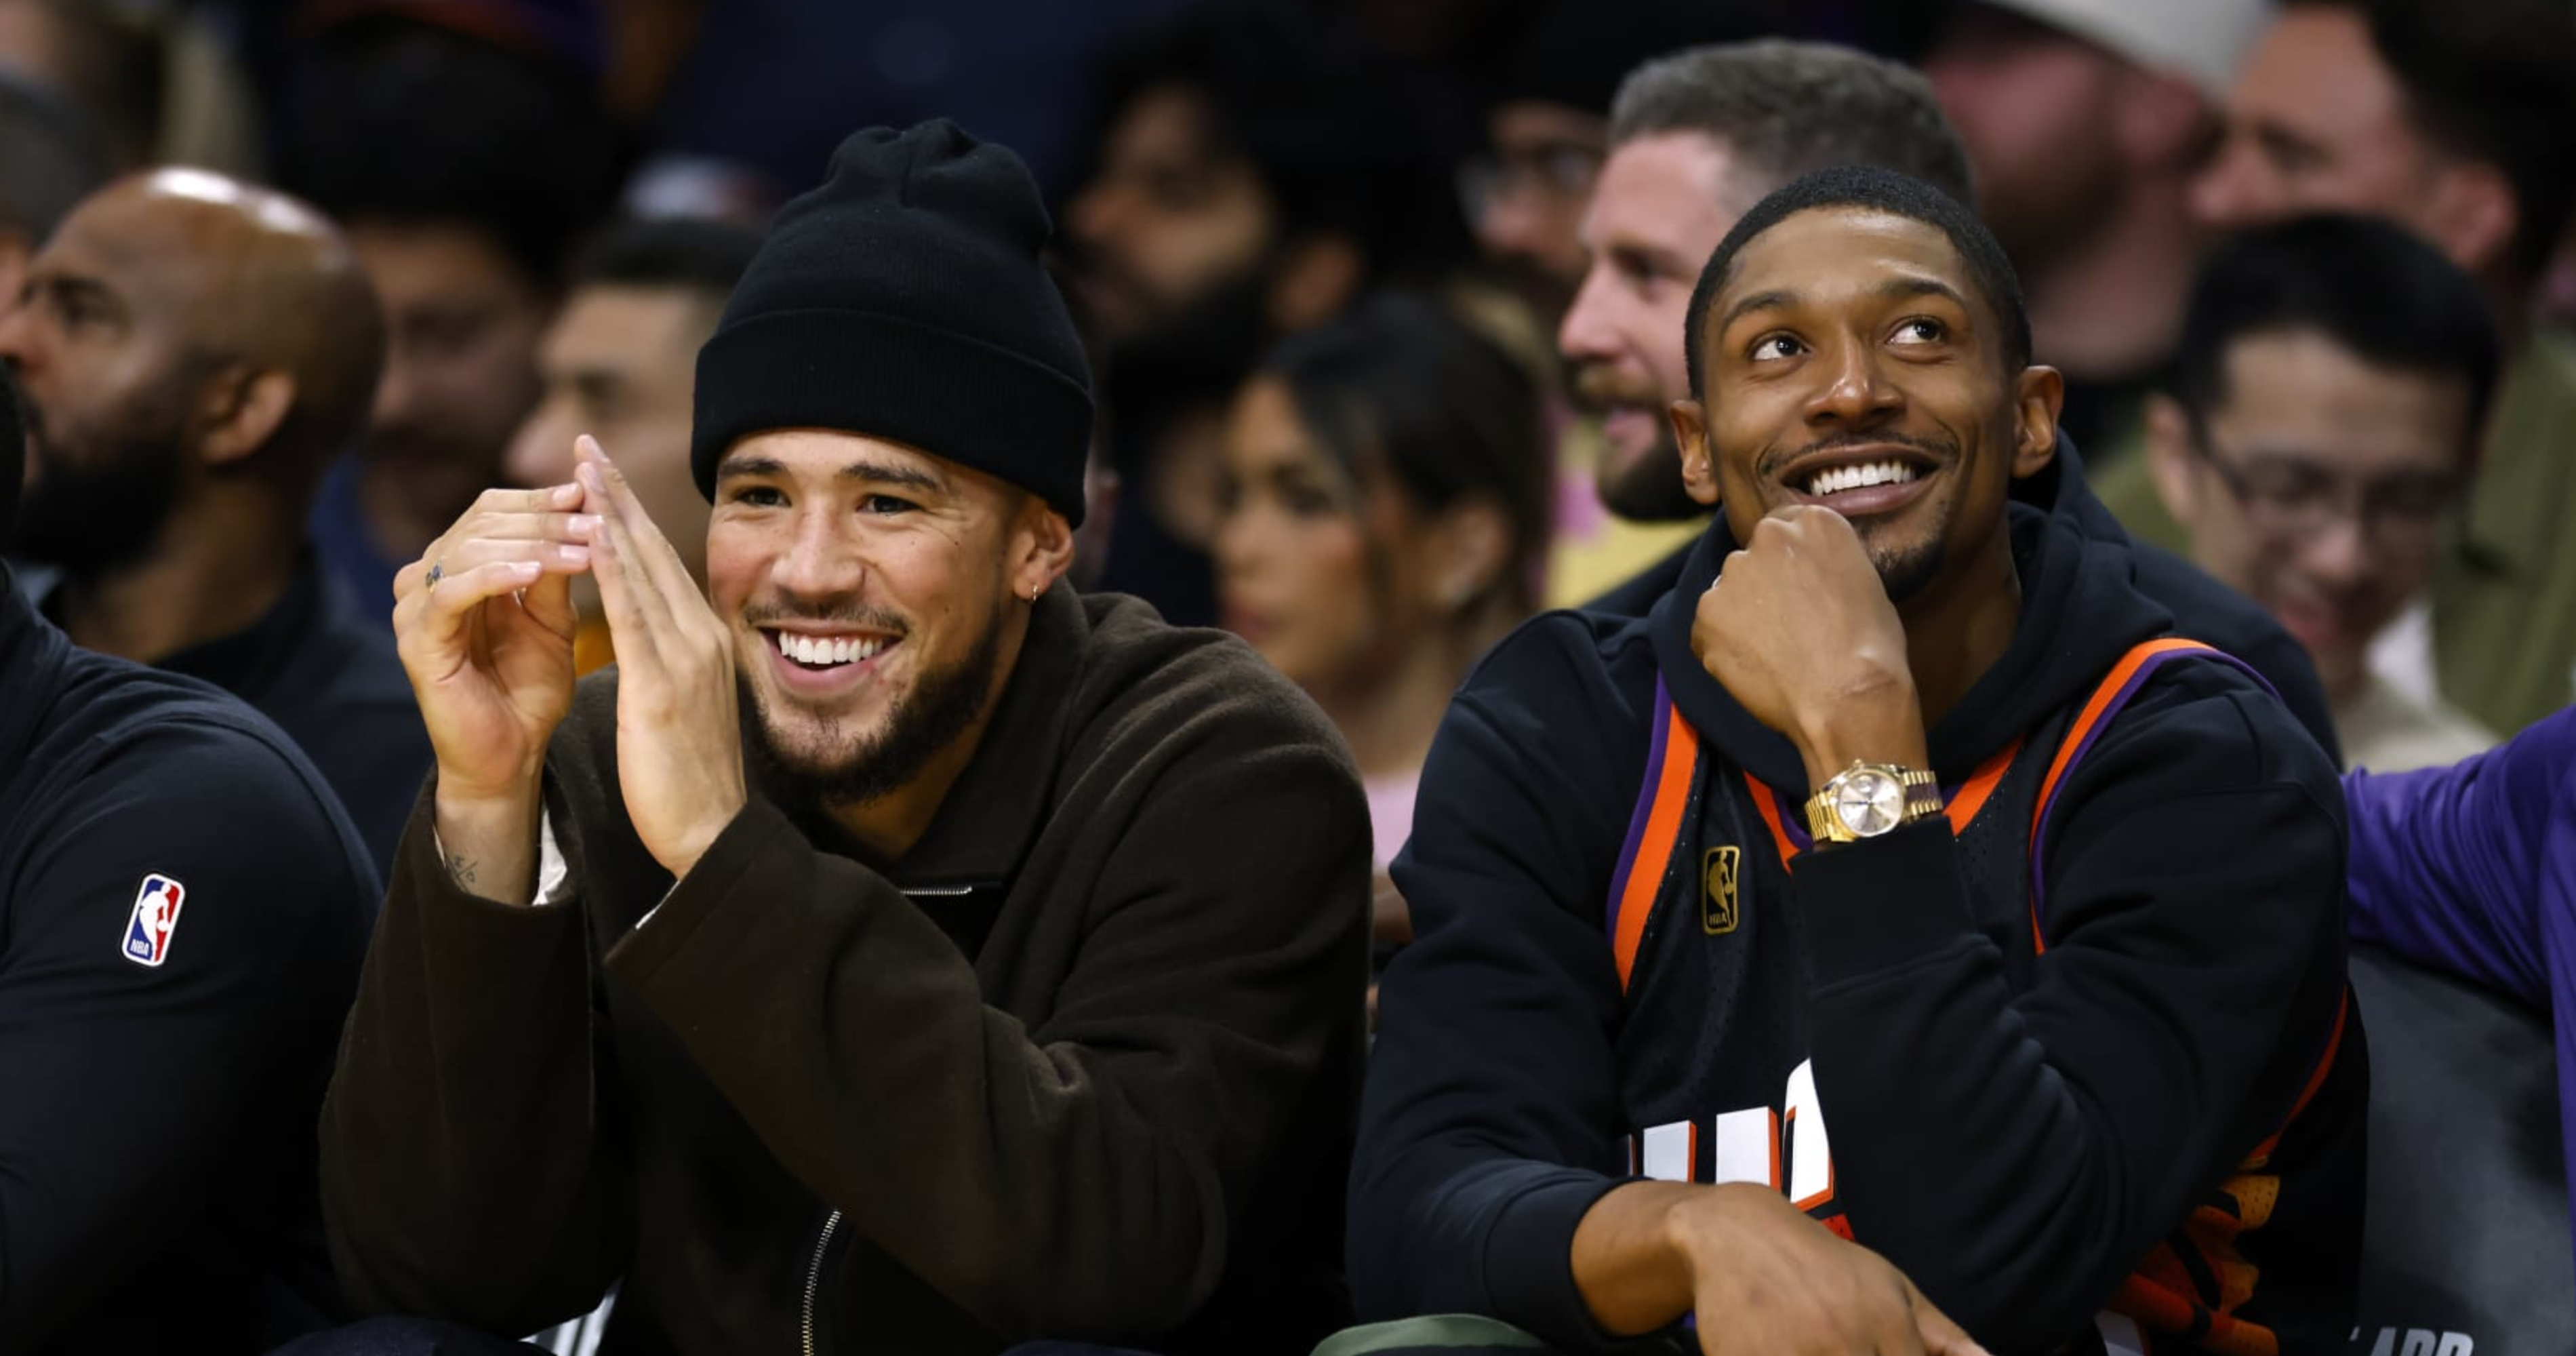 Suns Rumors: Bradley Beal Out vs. Jazz with Back Injury, Devin Booker Doubtful